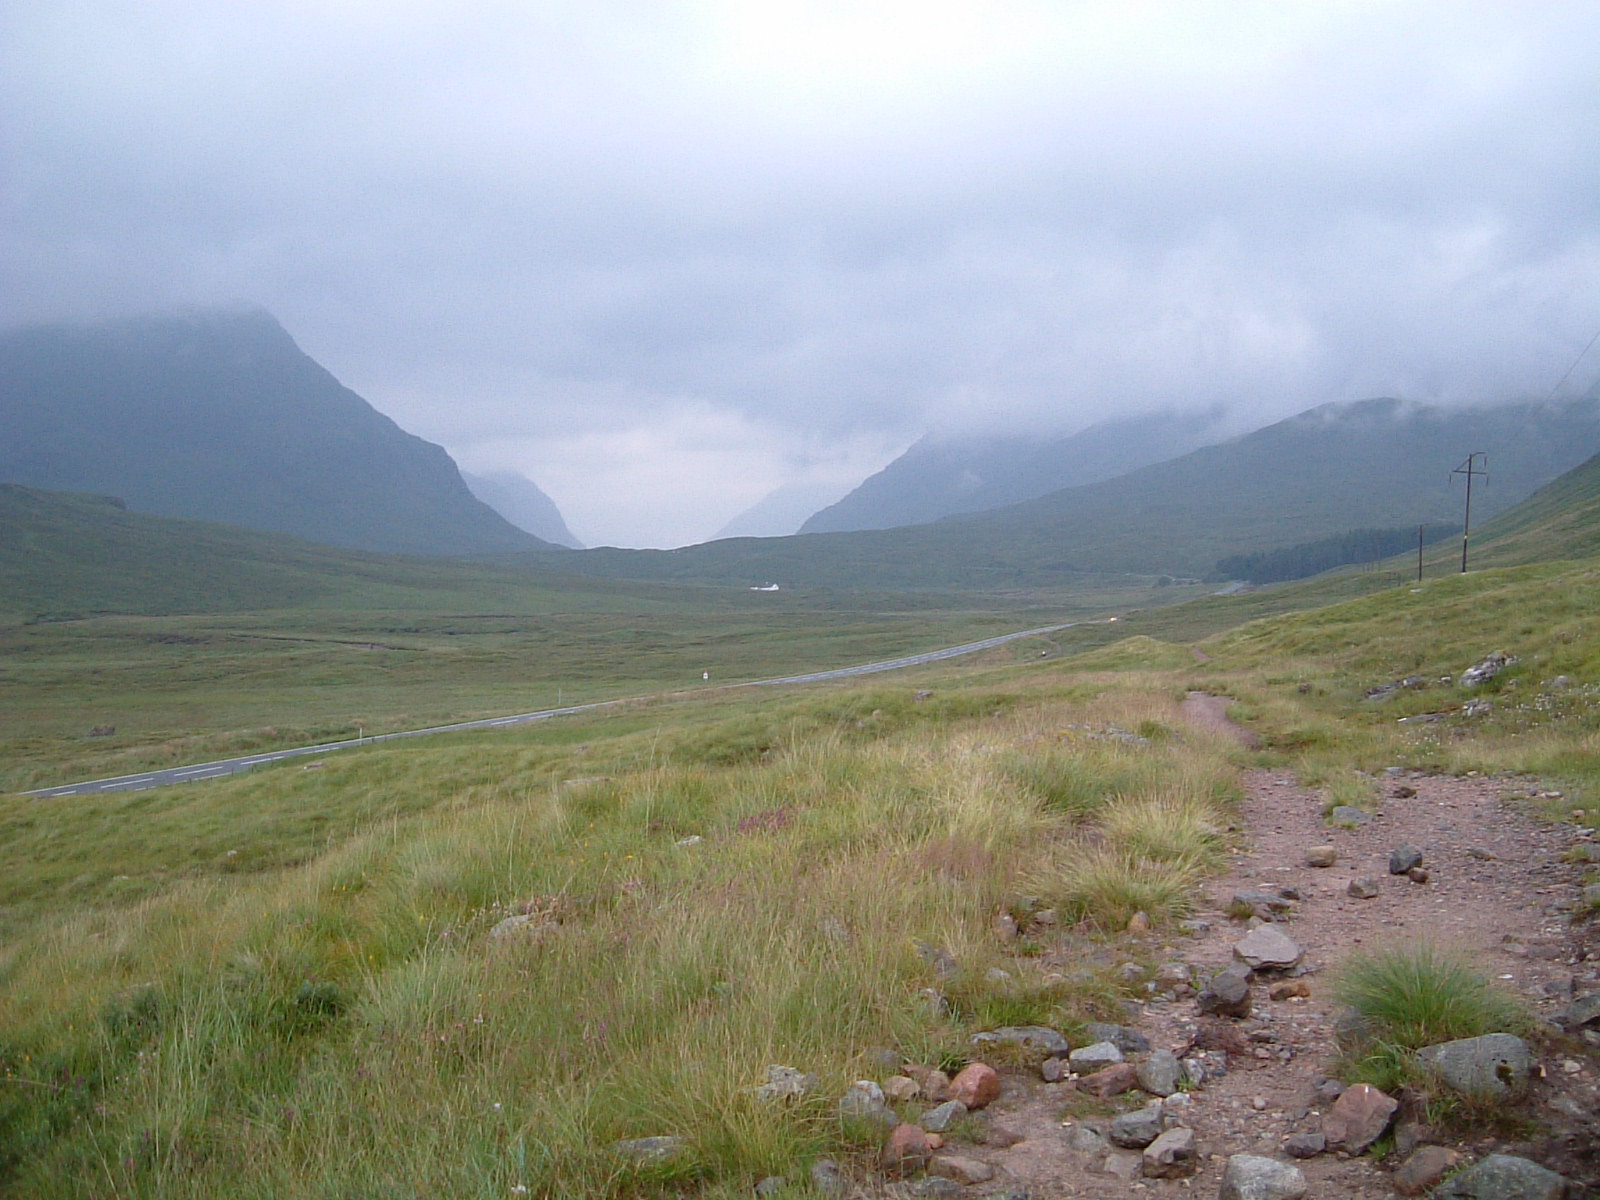 Looking towards Glen Coe from the West Highland Way